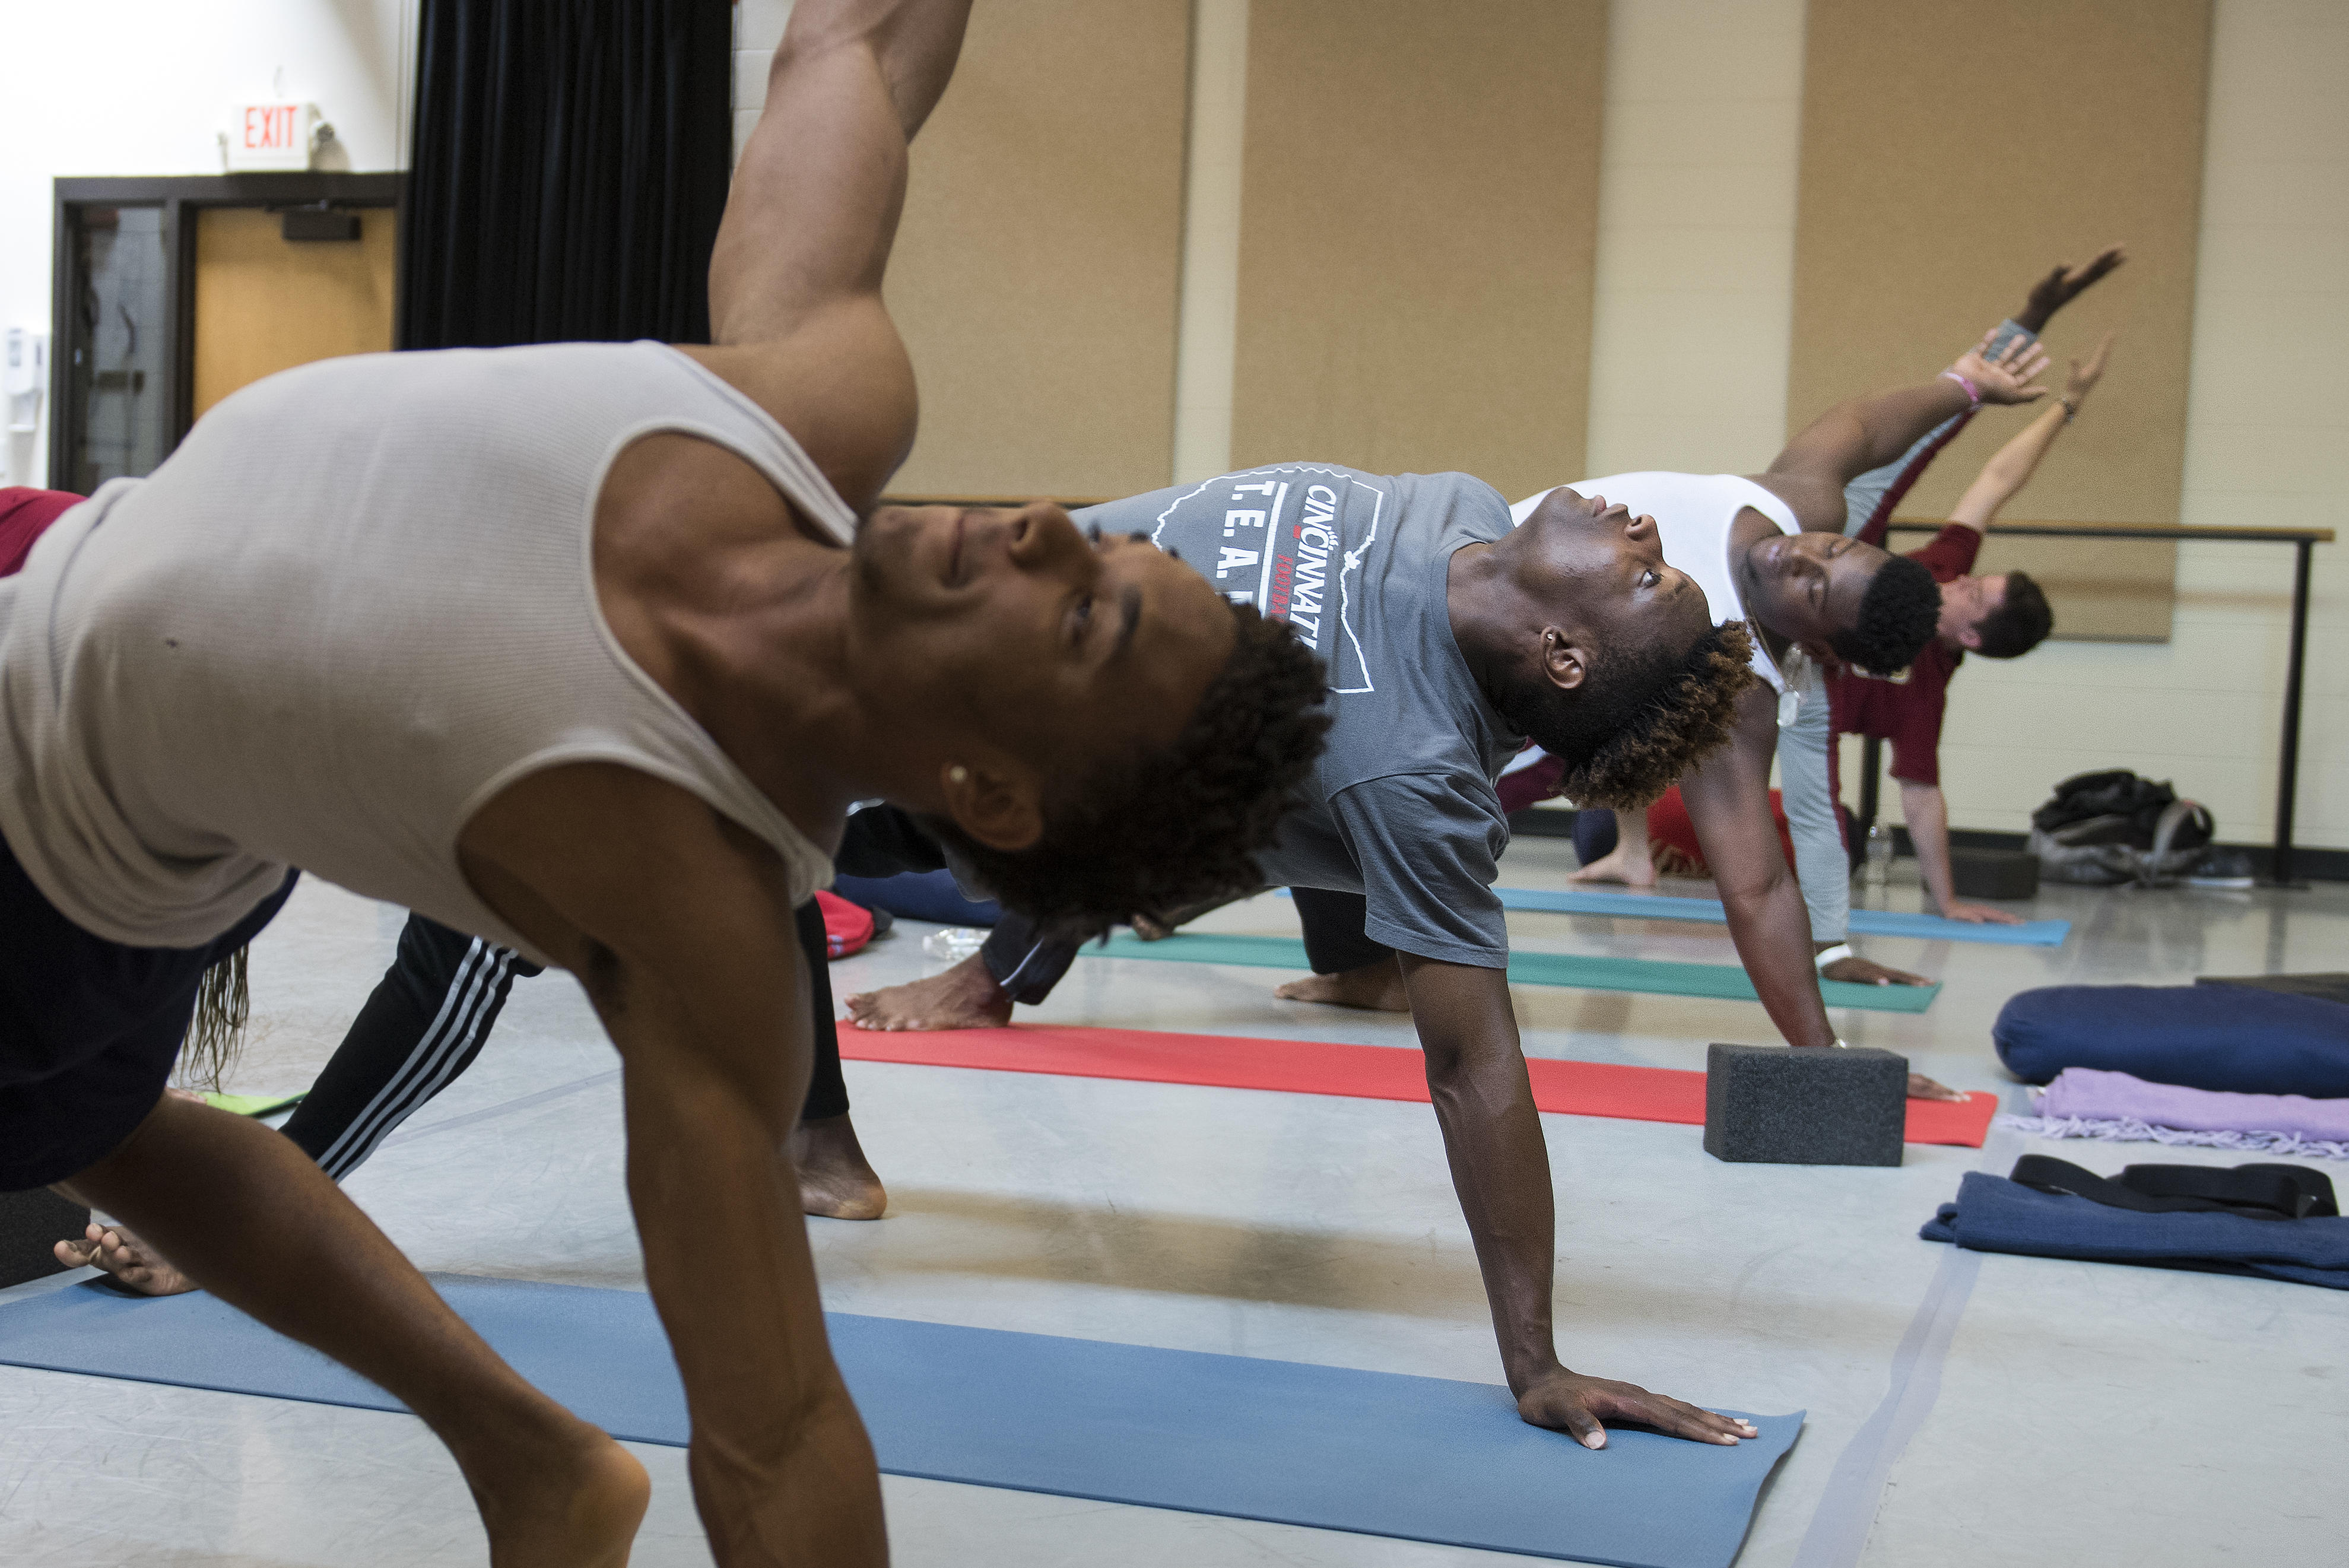 JUNE 13, 2018: Professor of Dance Lauren Kearns works with students in her summer yoga class in the Center for the Arts. (photo by Kim Walker)